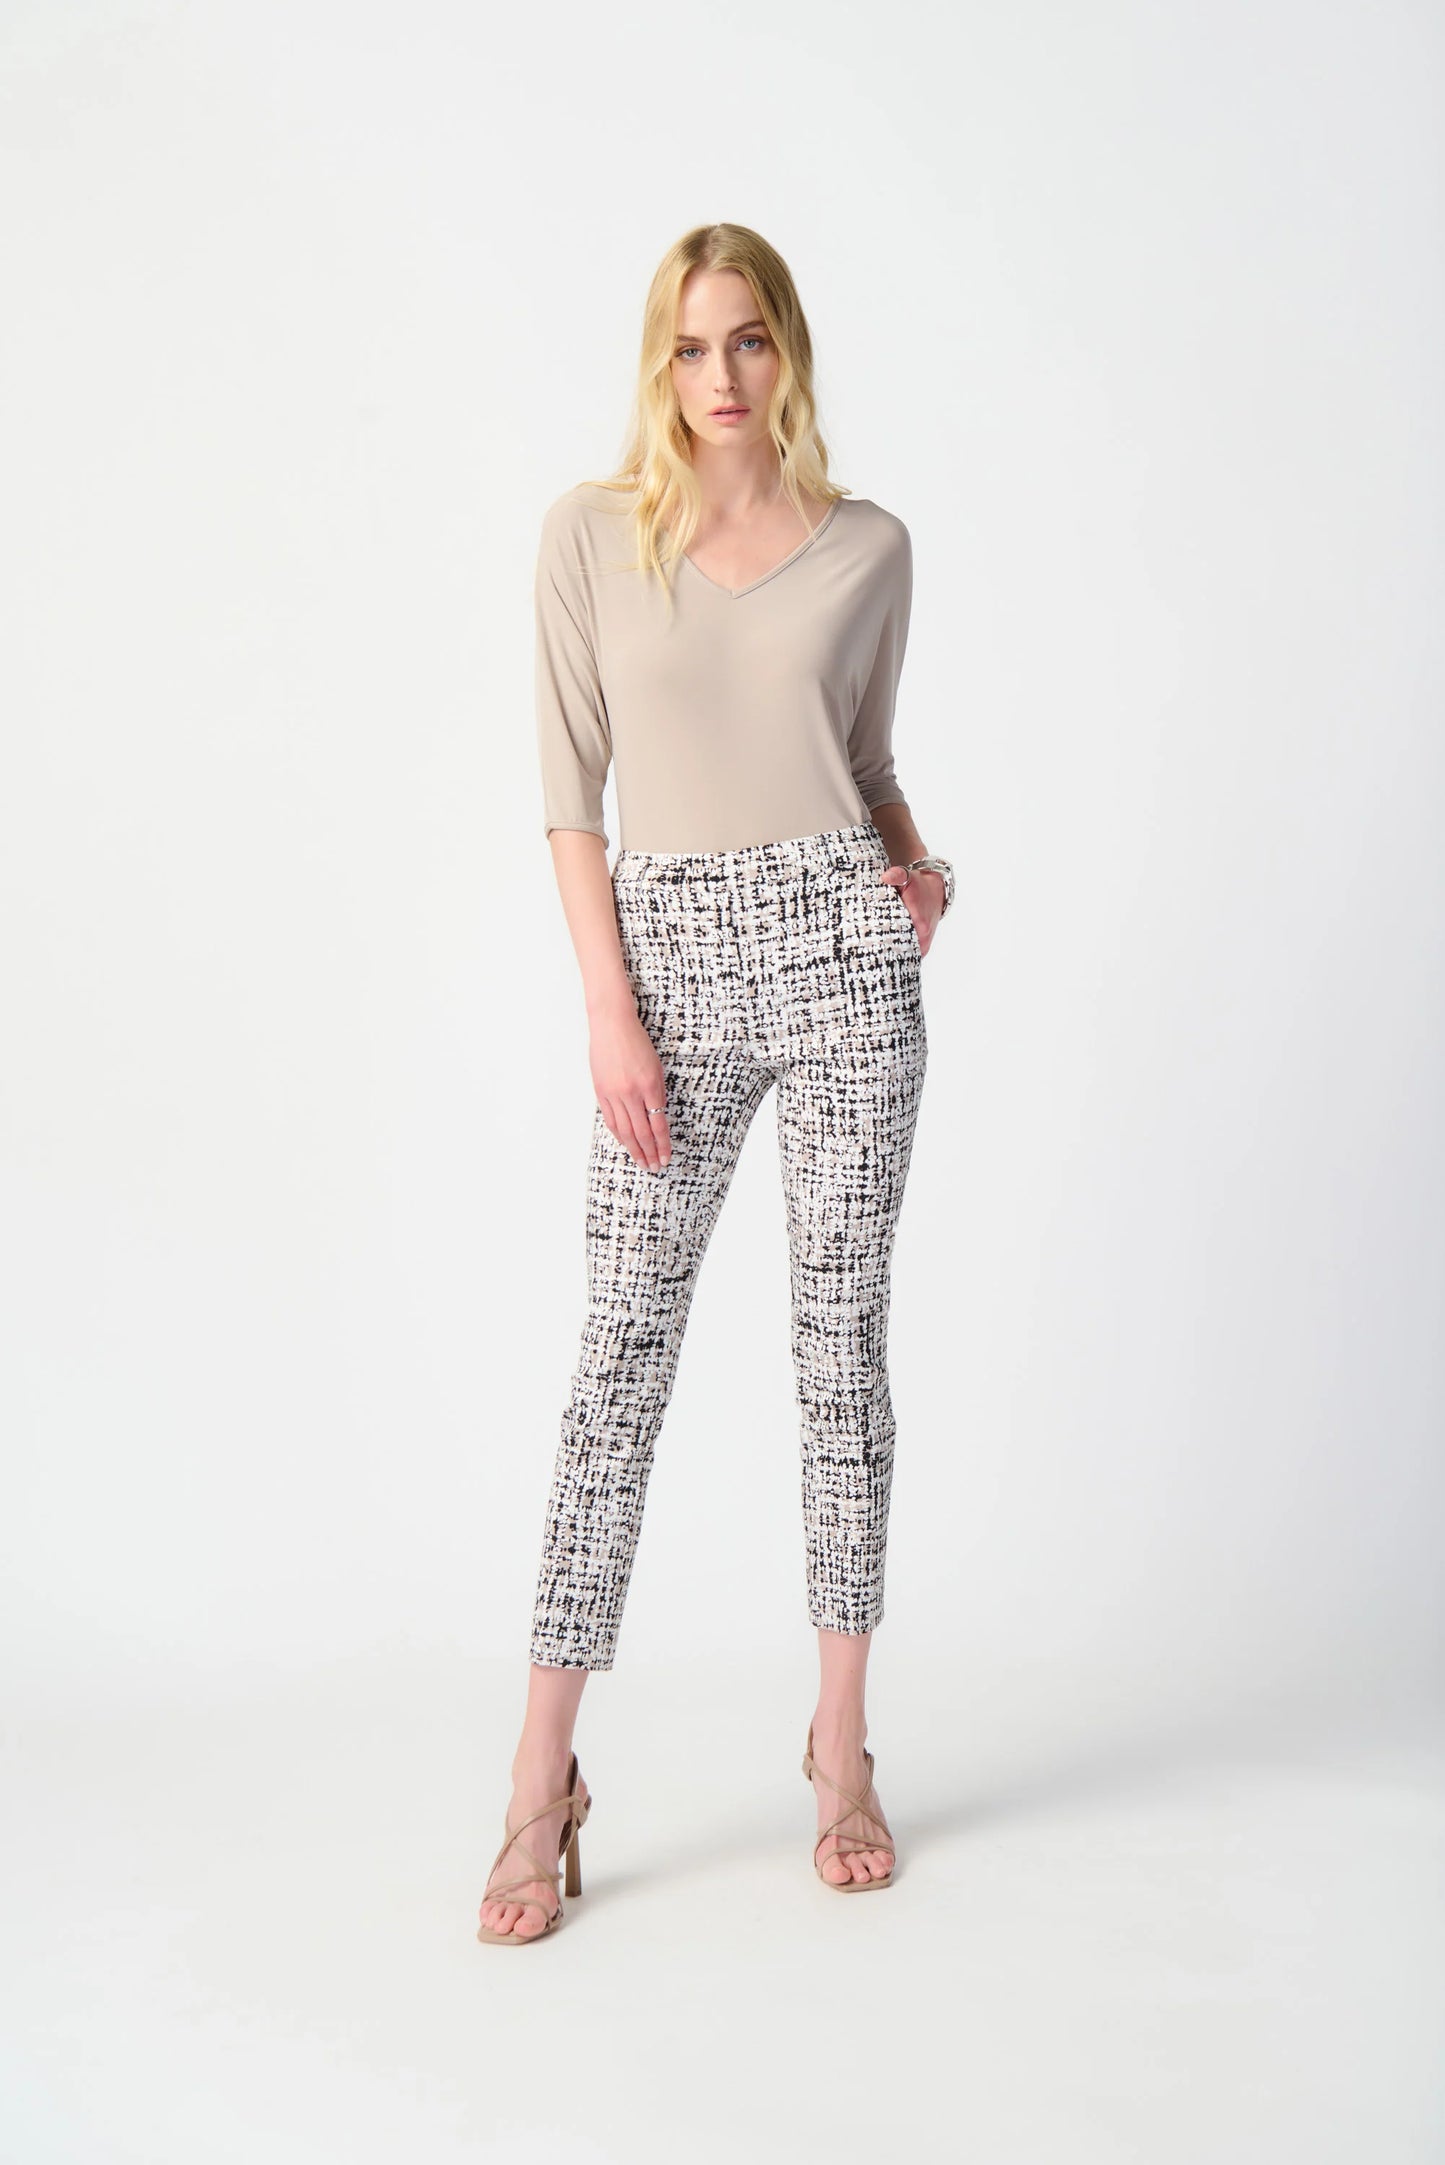 Abstract Print Millennium Pull-On Pants
241189